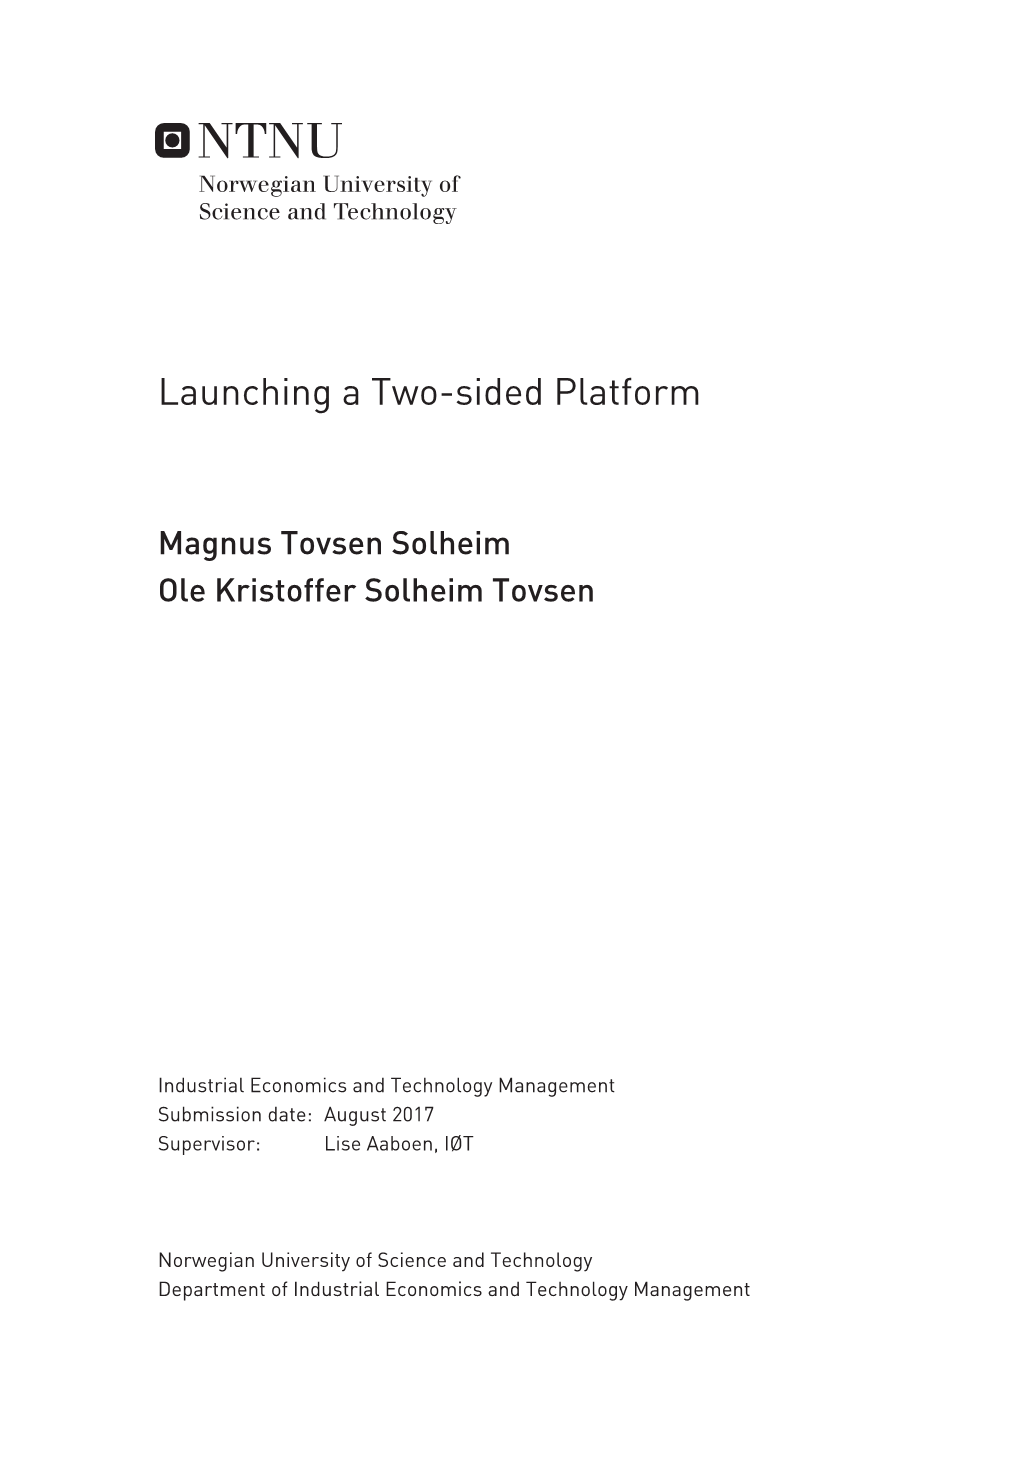 Launching a Two-Sided Platform